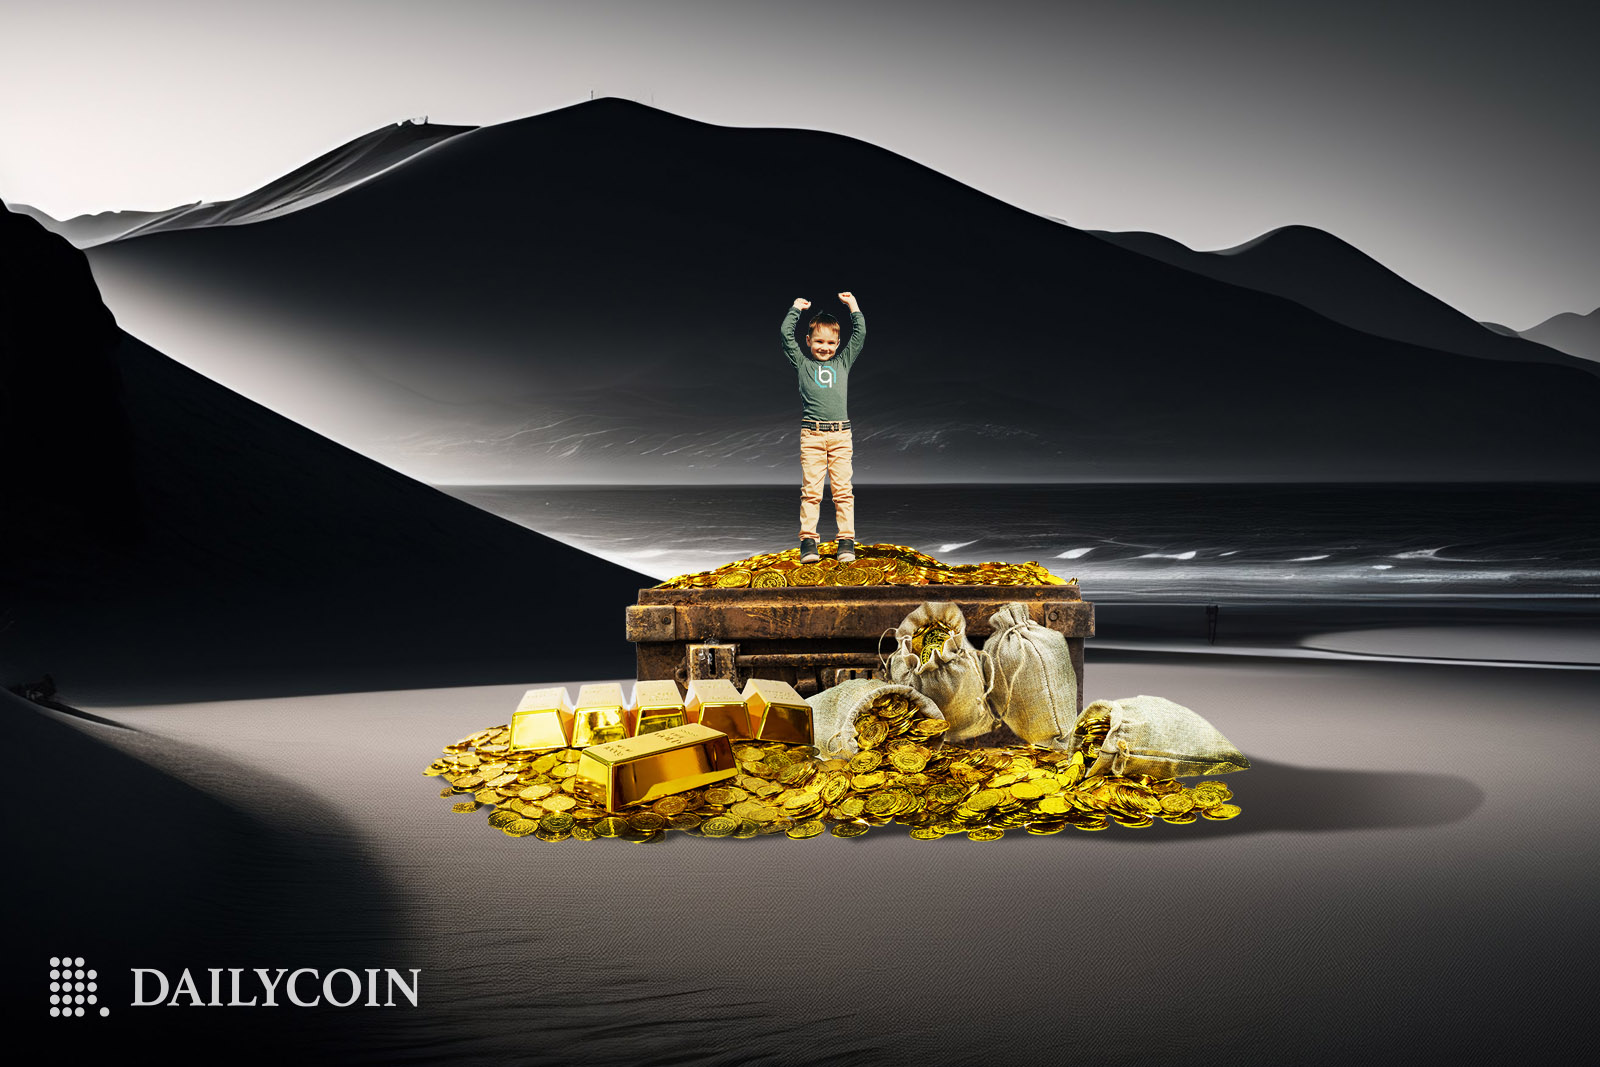 Kid standing on a treasure in the middle of a gray valley.